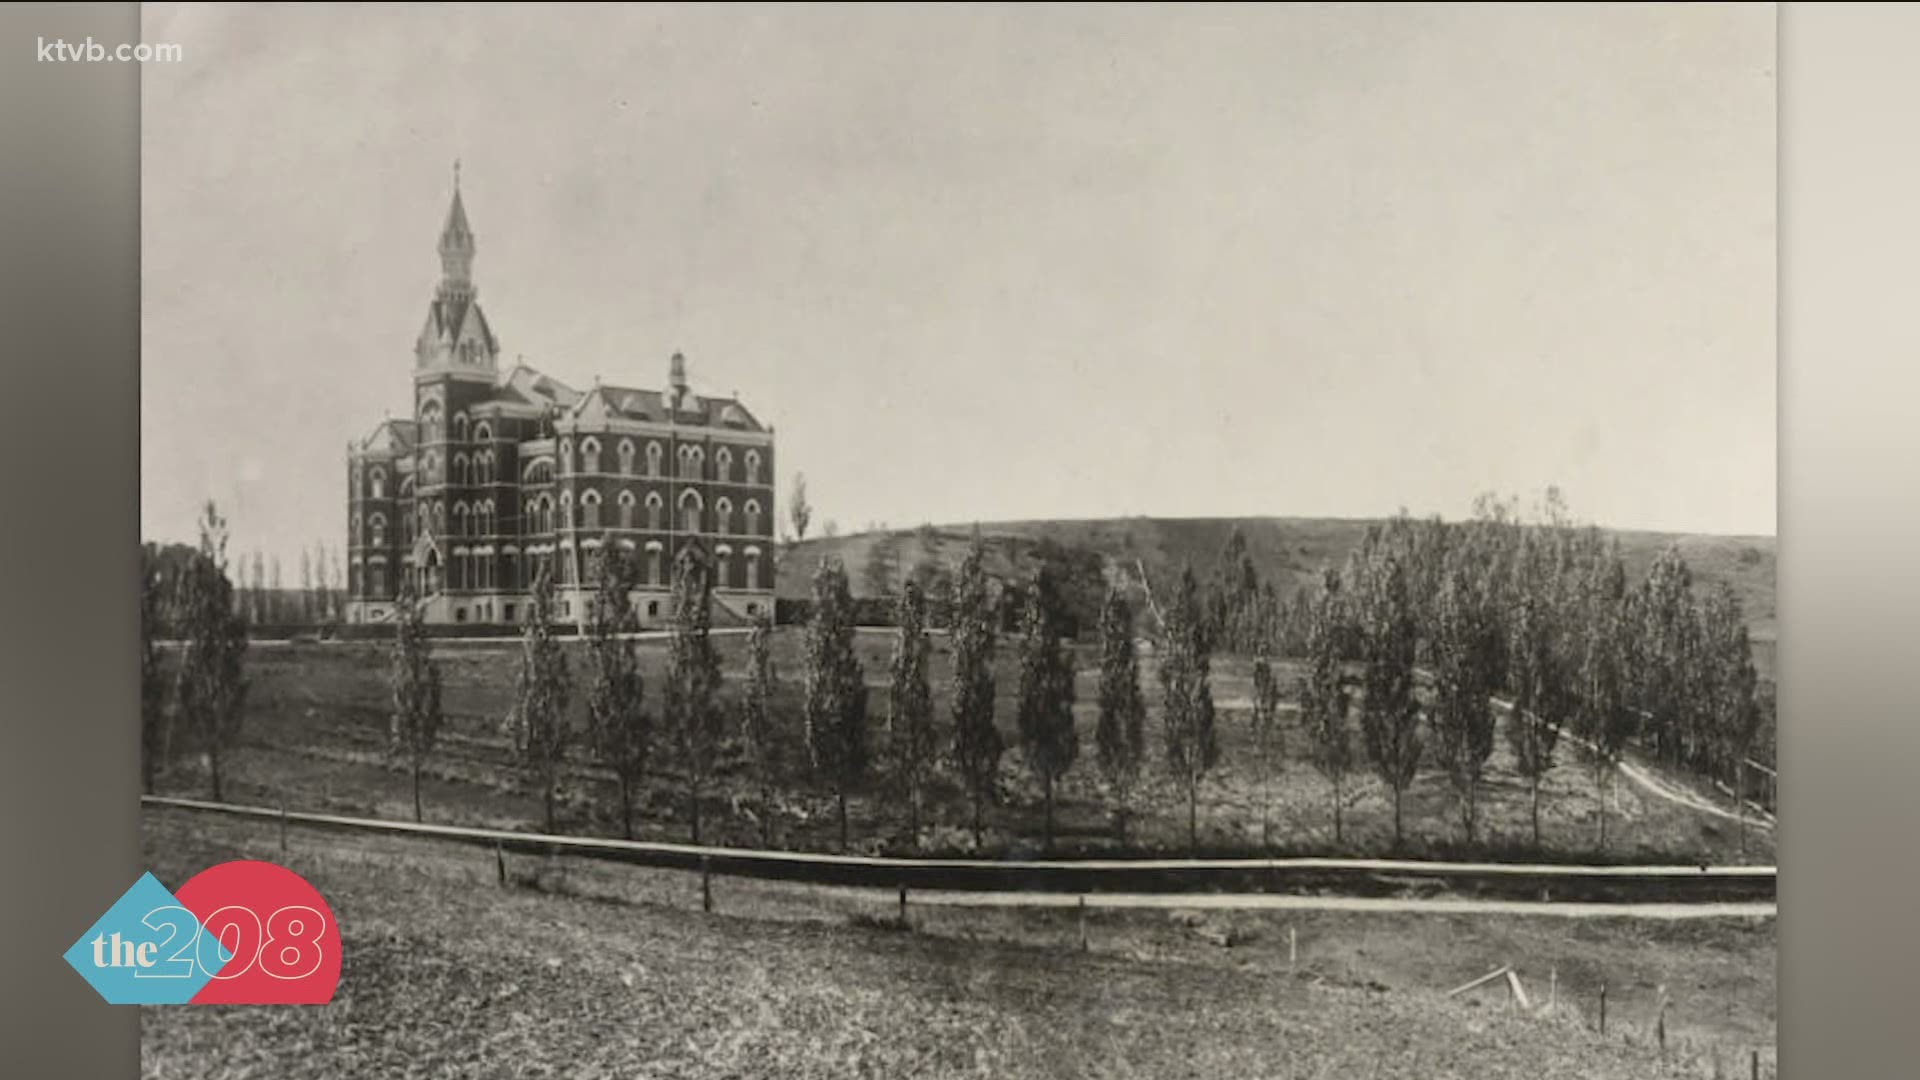 We take a look back at how the University of Idaho came to be before Idaho was a state.